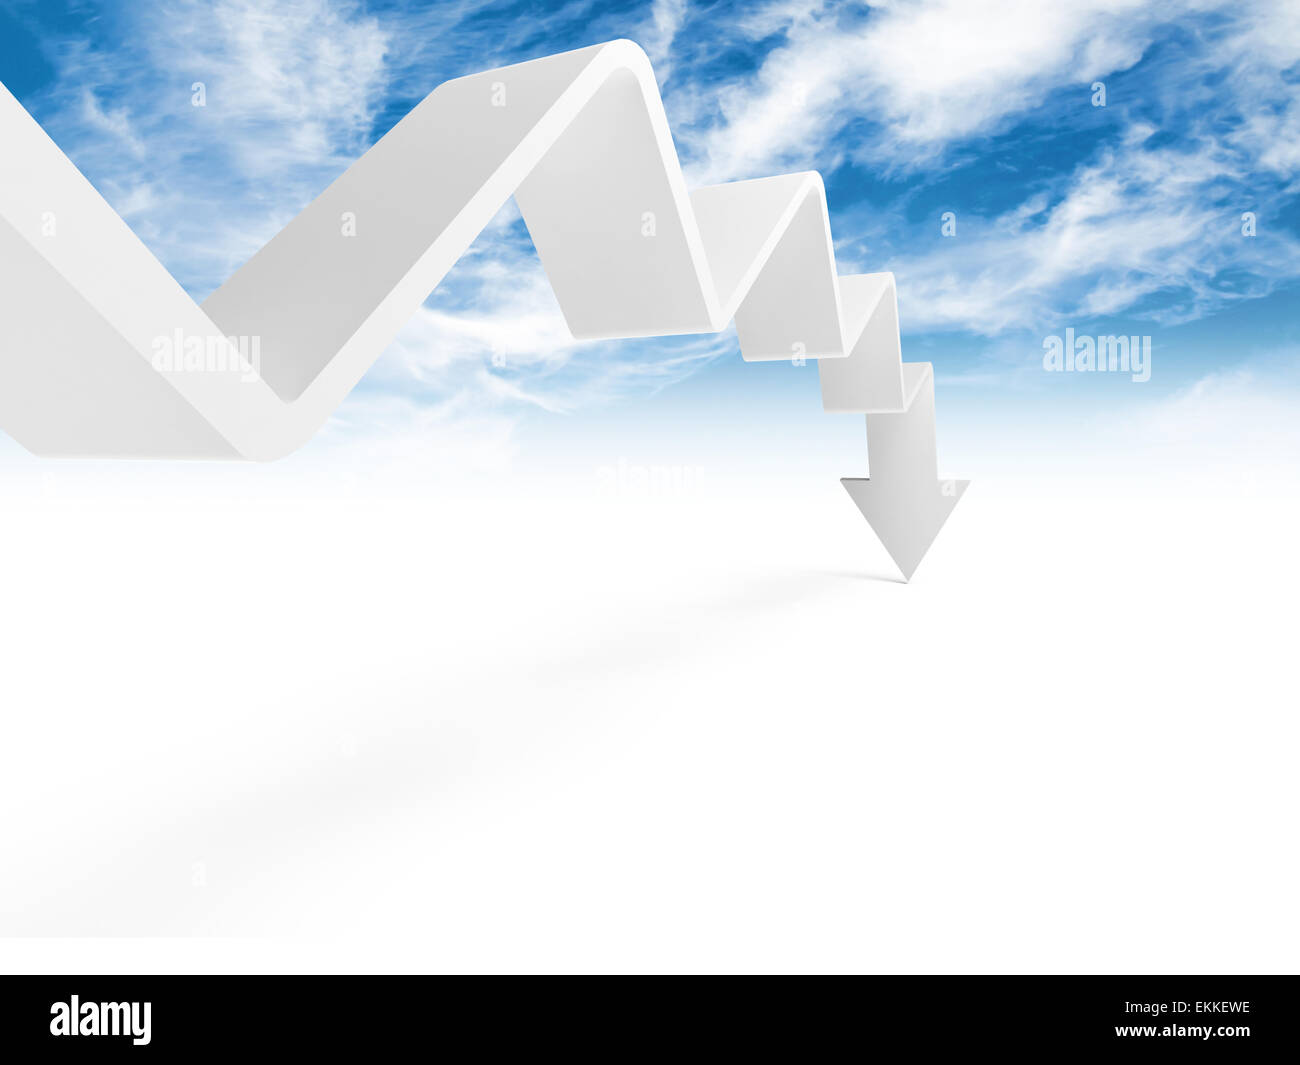 Broken trend line with arrow on the end is going down, 3d illustration with cloudy sky photo background Stock Photo